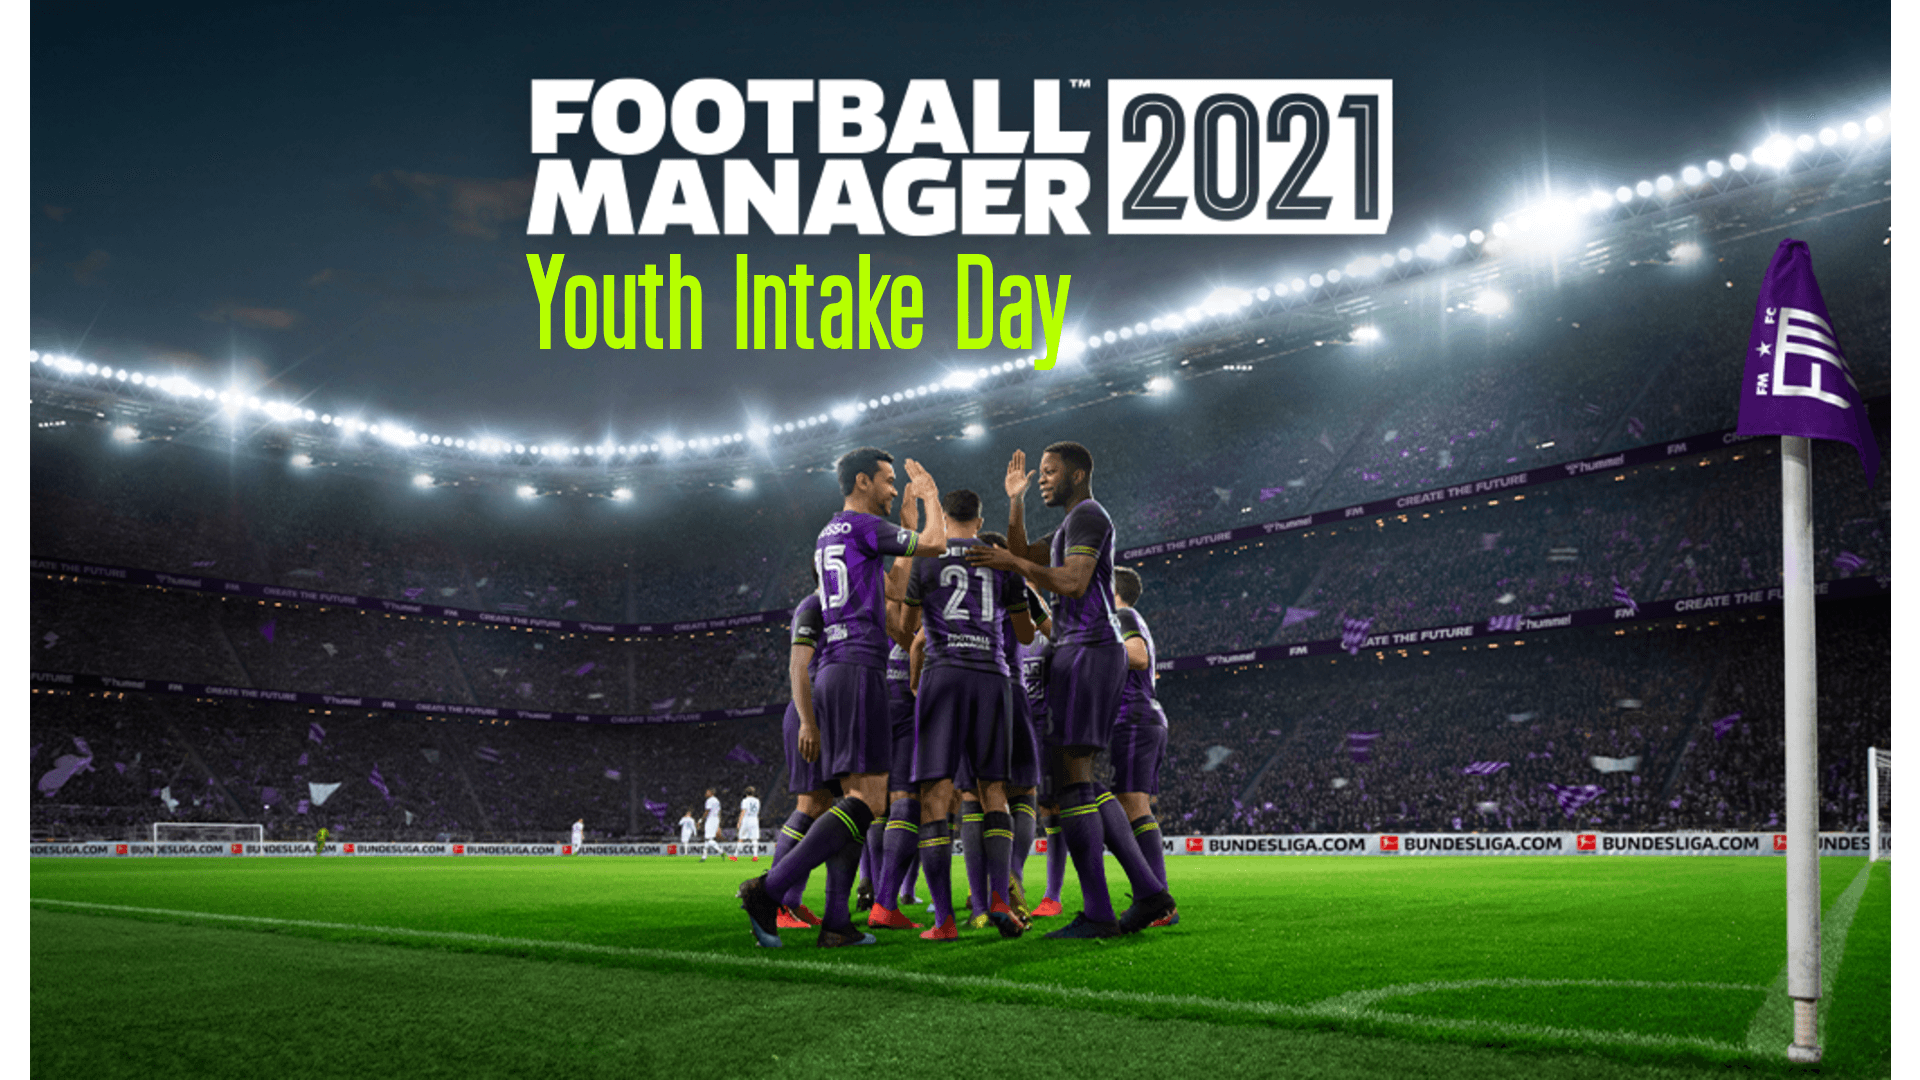 Football Manager 2021 Youth Intake